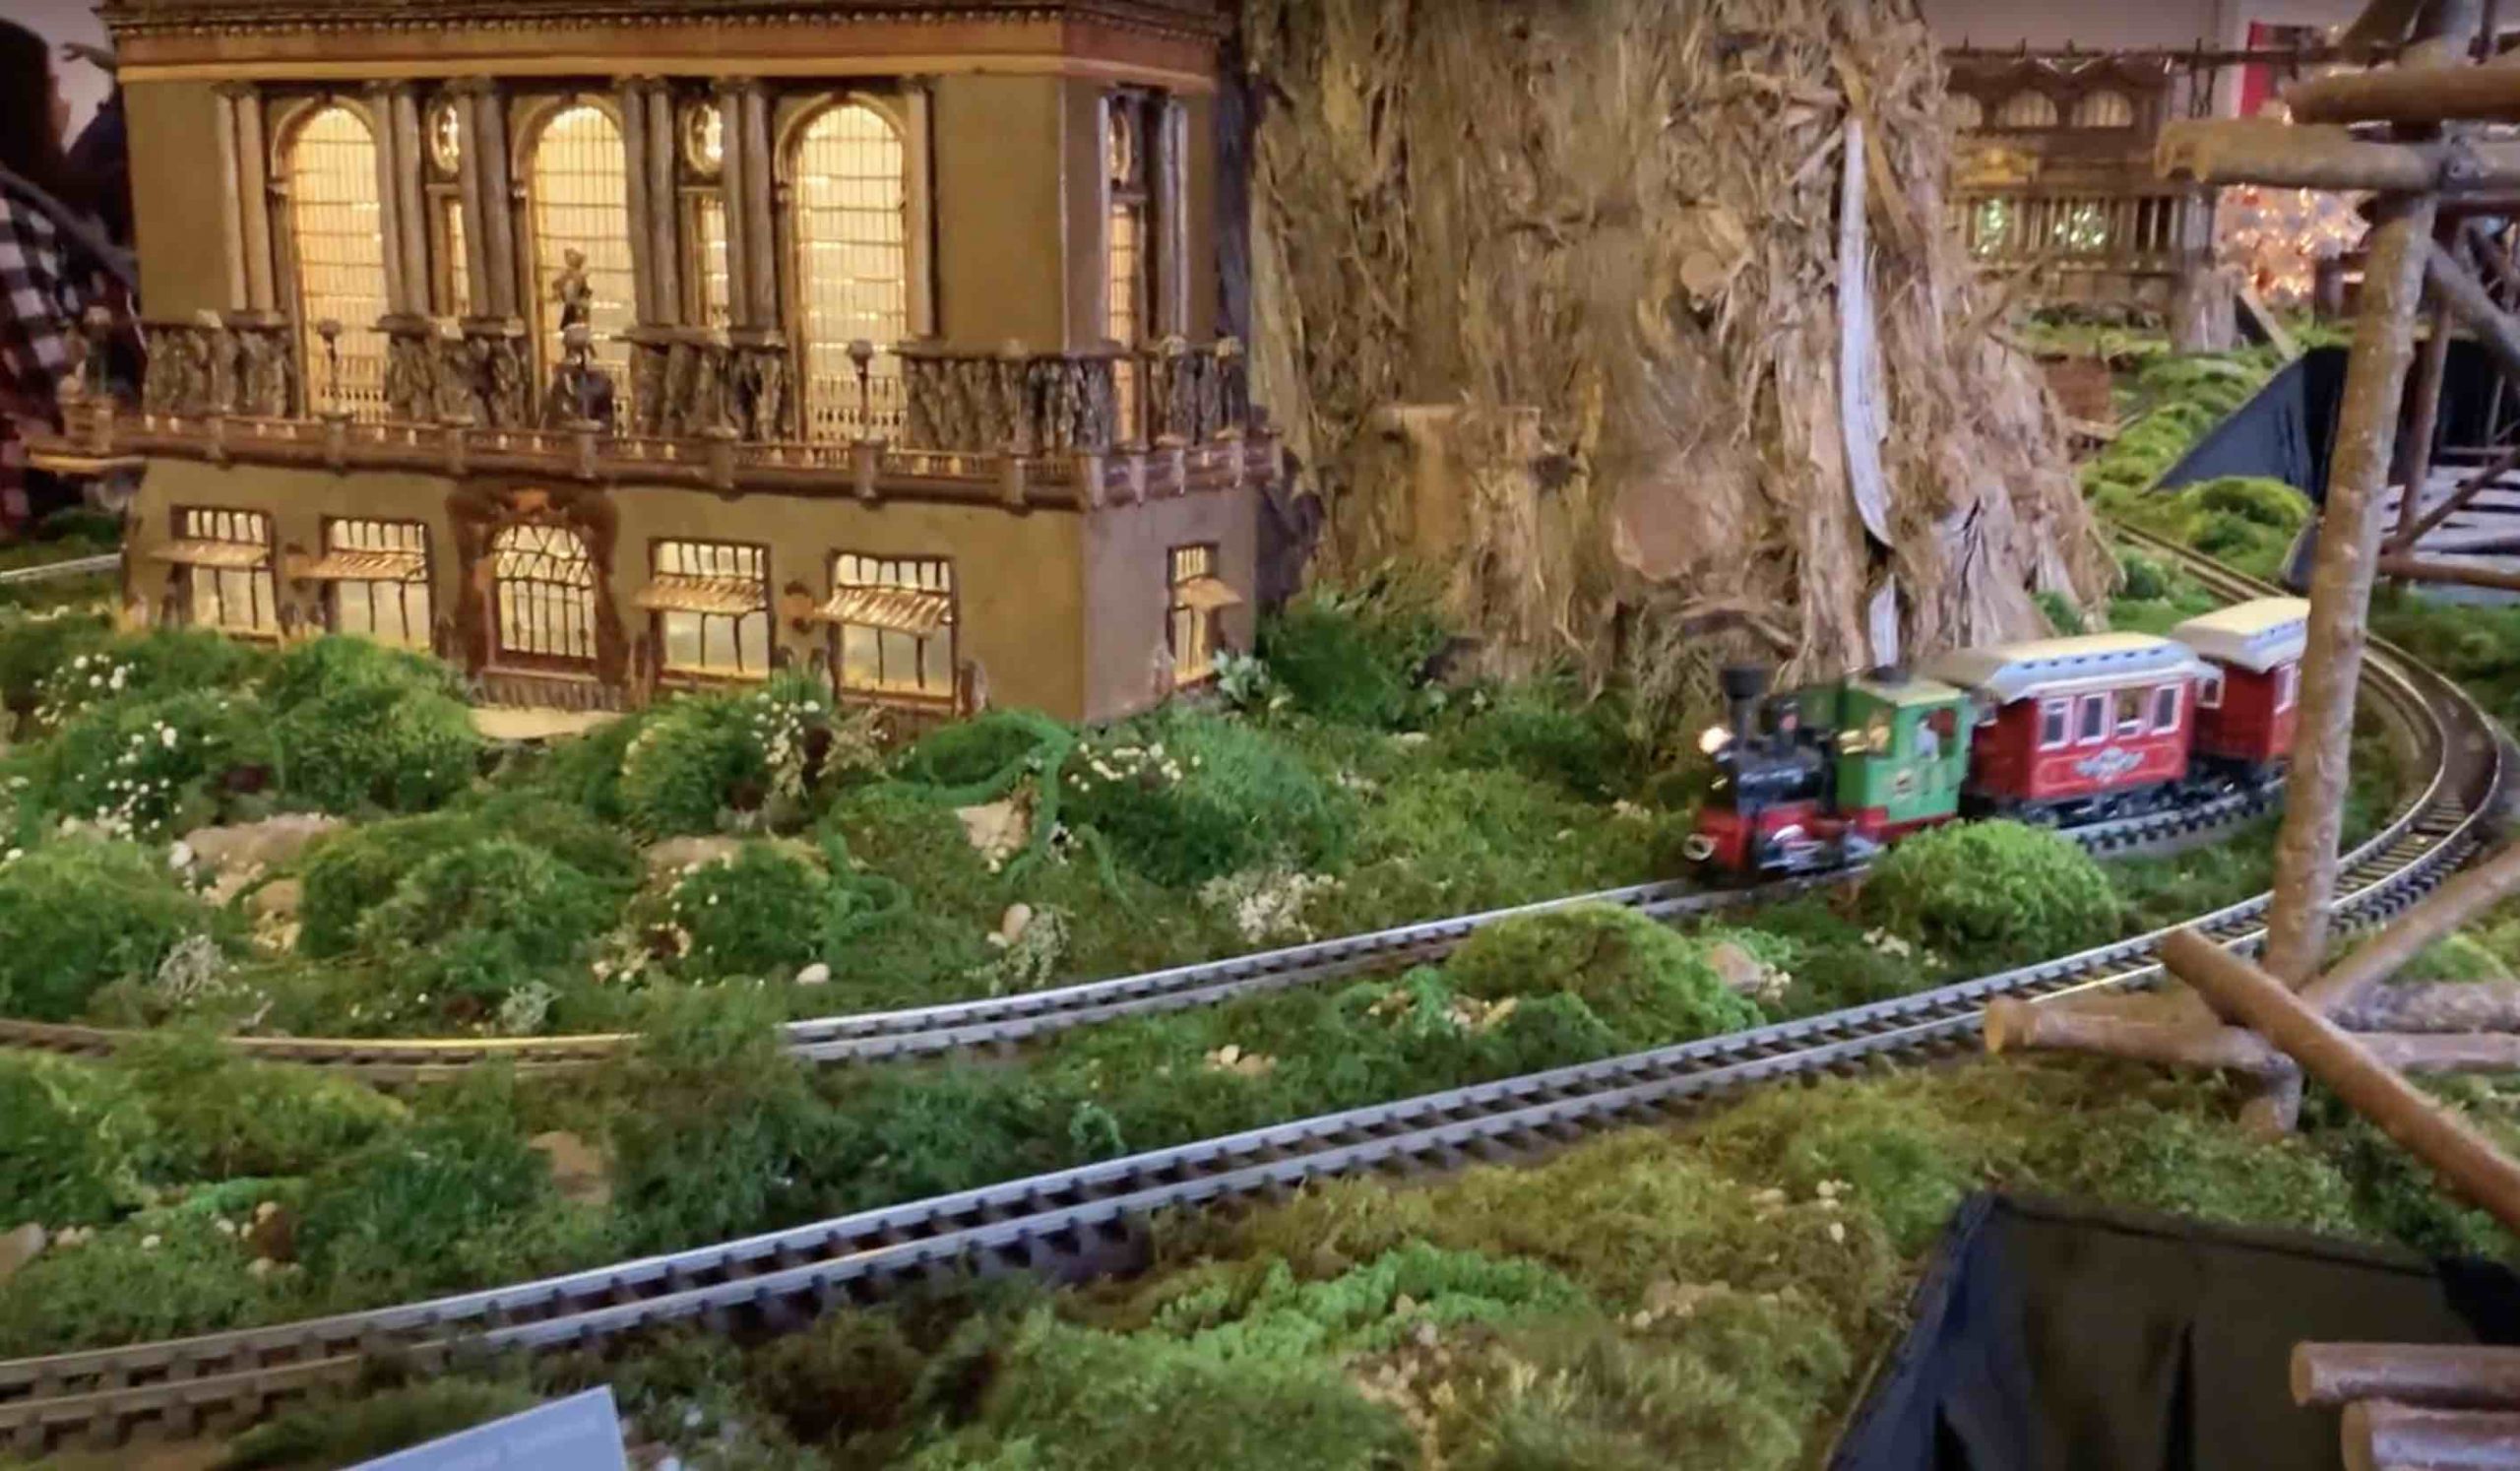 Review of the New York Holiday Train Show